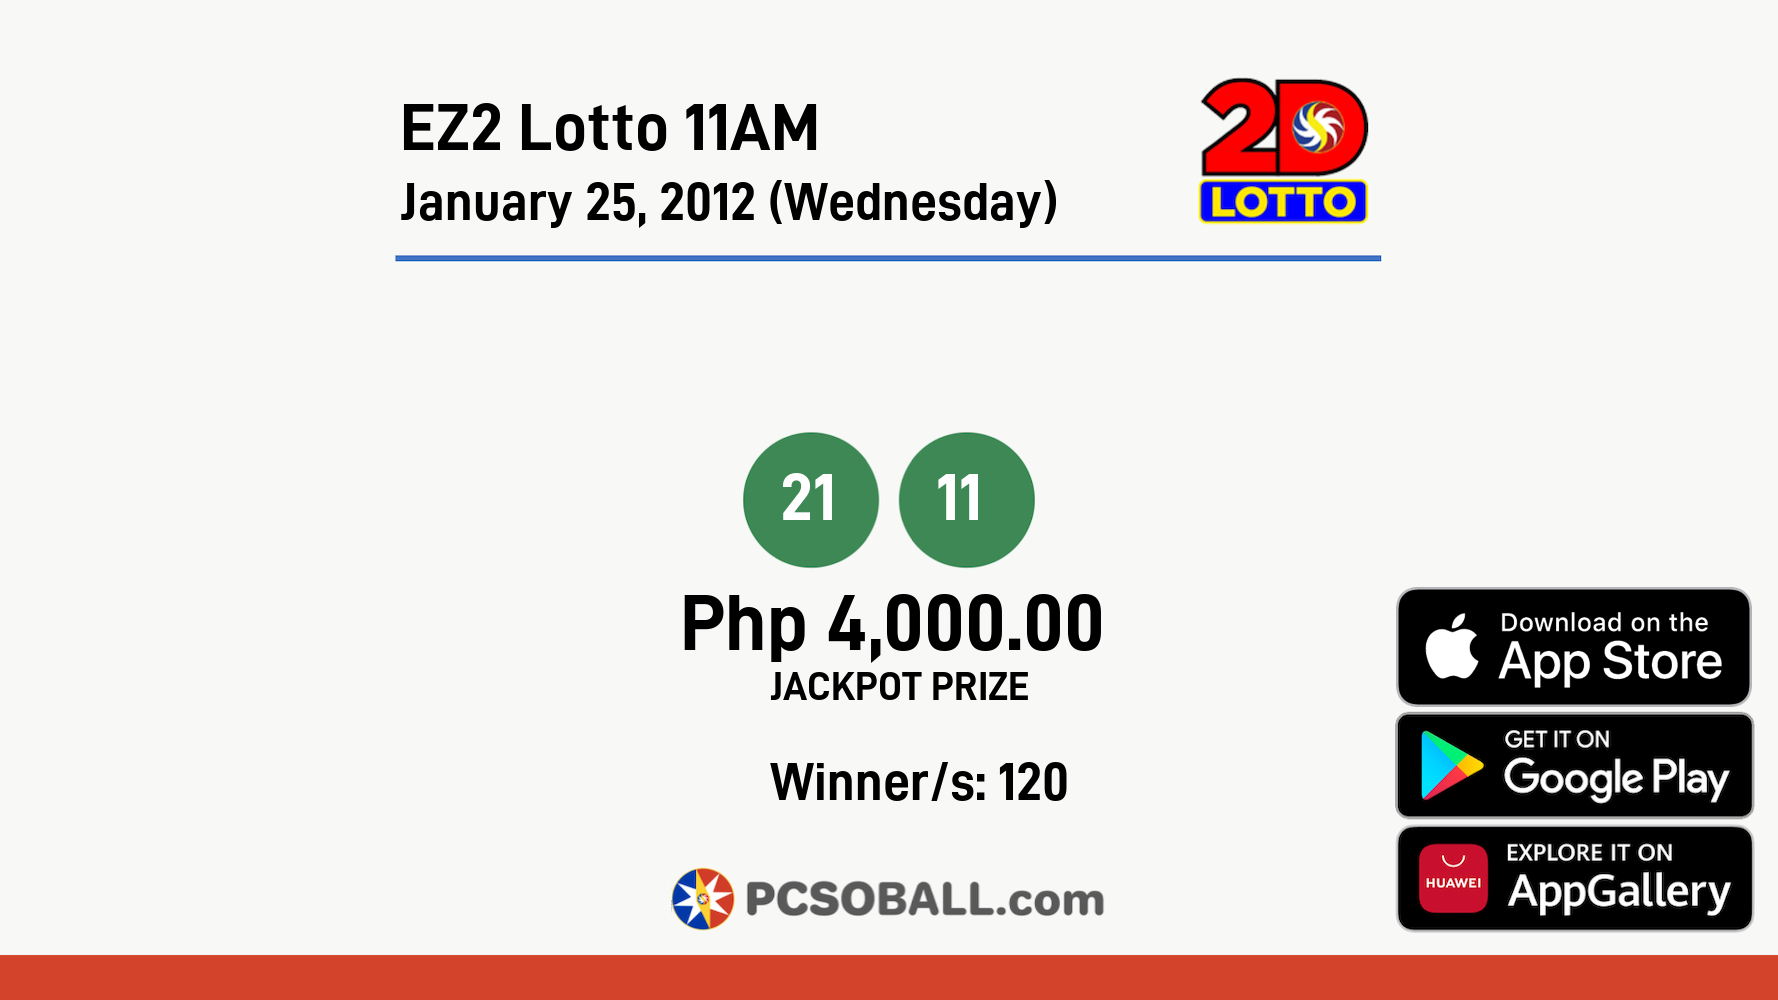 EZ2 Lotto 11AM January 25, 2012 (Wednesday) Result